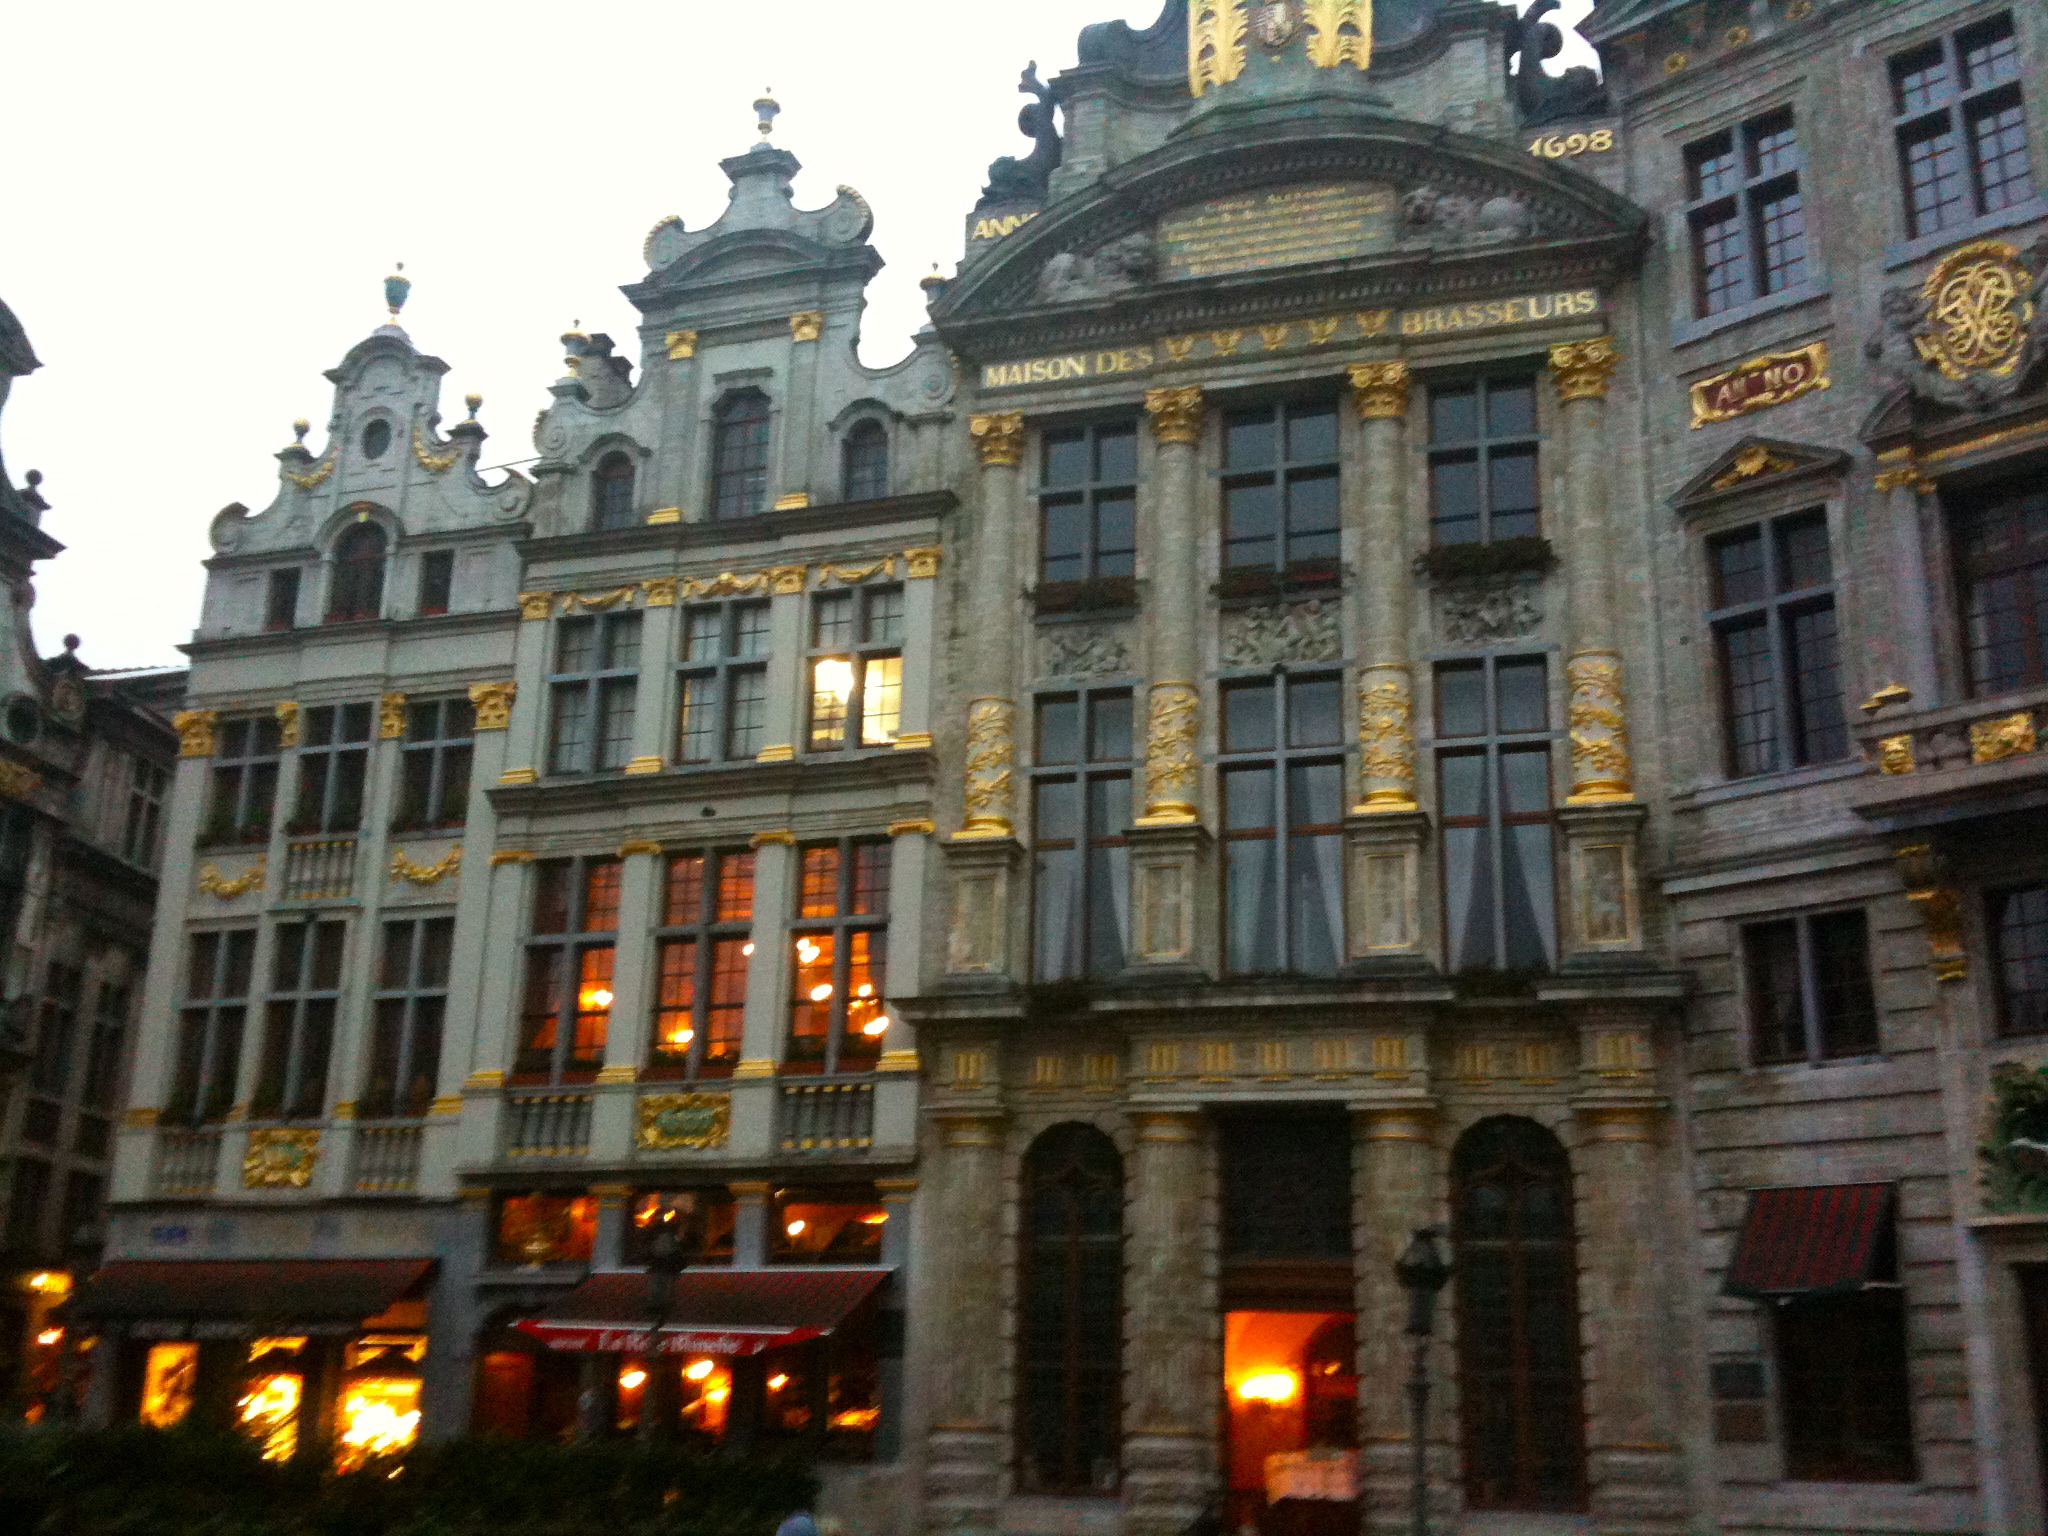 some fancy buildings with ornate architectural details at night